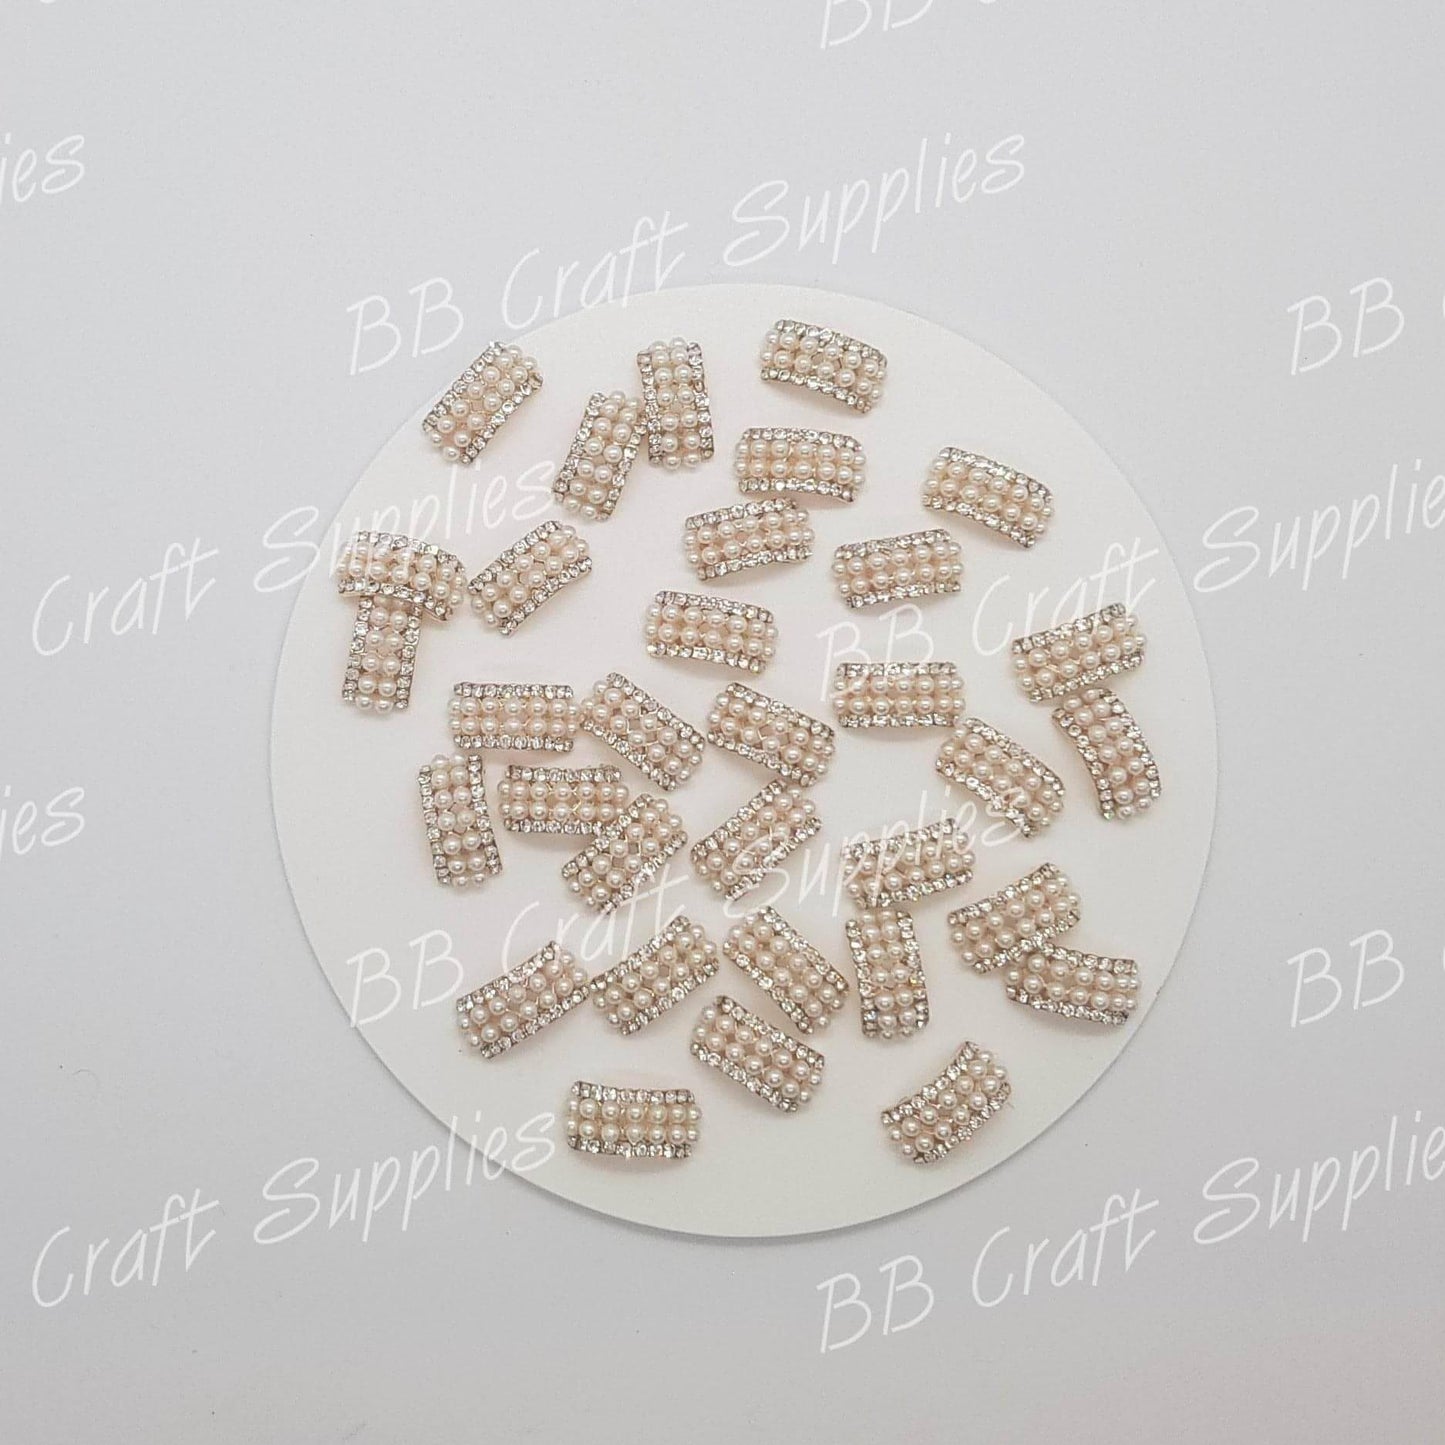 Pearl bow center embellishments - Bling, Bow, Centre, Embelishment, Pearl - Bare Butler Faux Leather Supplies 